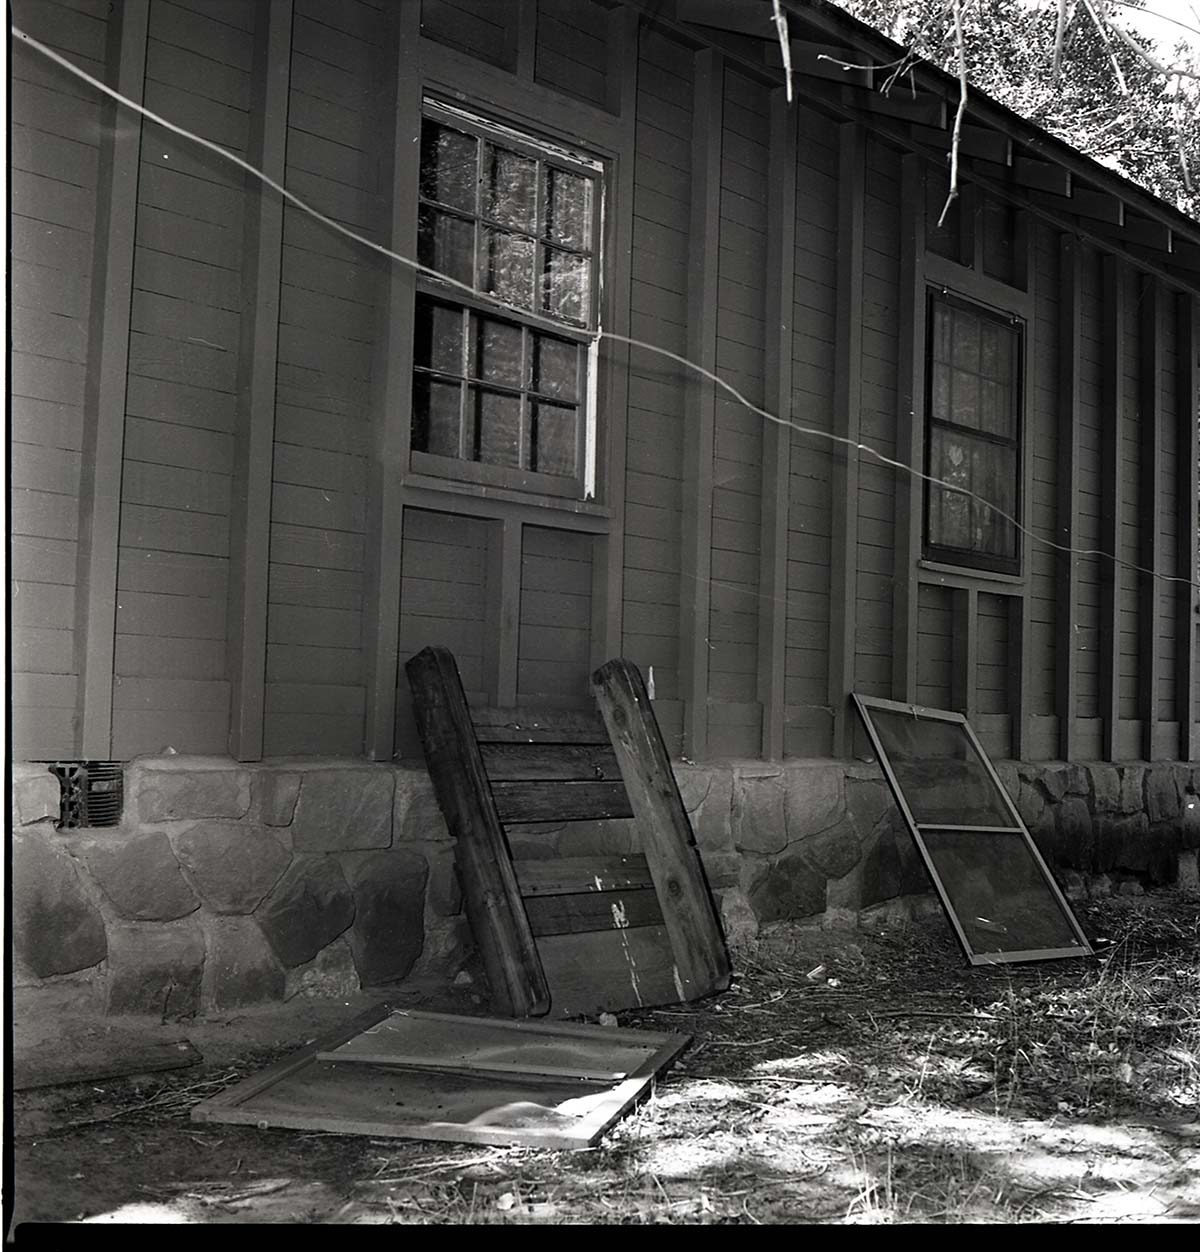 Damage to the men's dorm at Zion Lodge. Window, screen, and furniture outside of dorm.